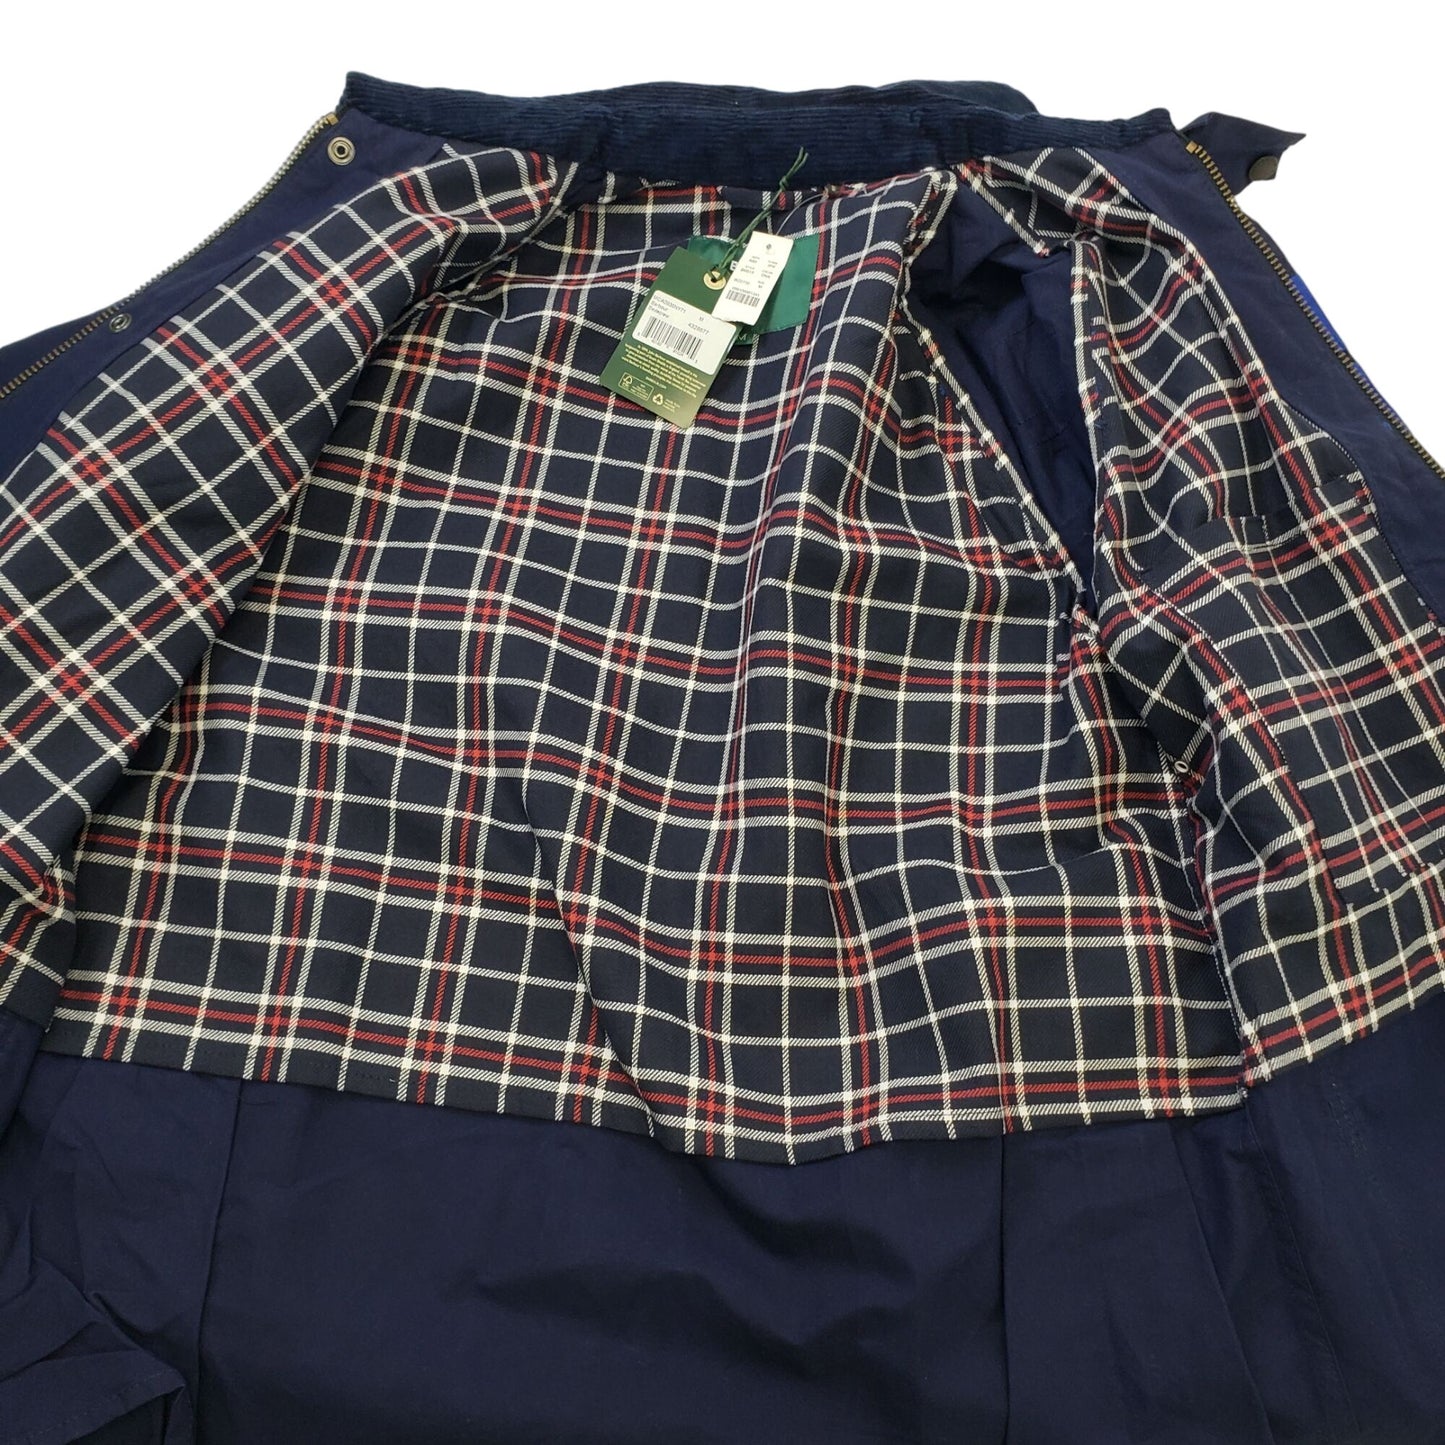 NWT J. Crew Limited-edition Barbour X J.Crew Bedale Jacket Size Medium